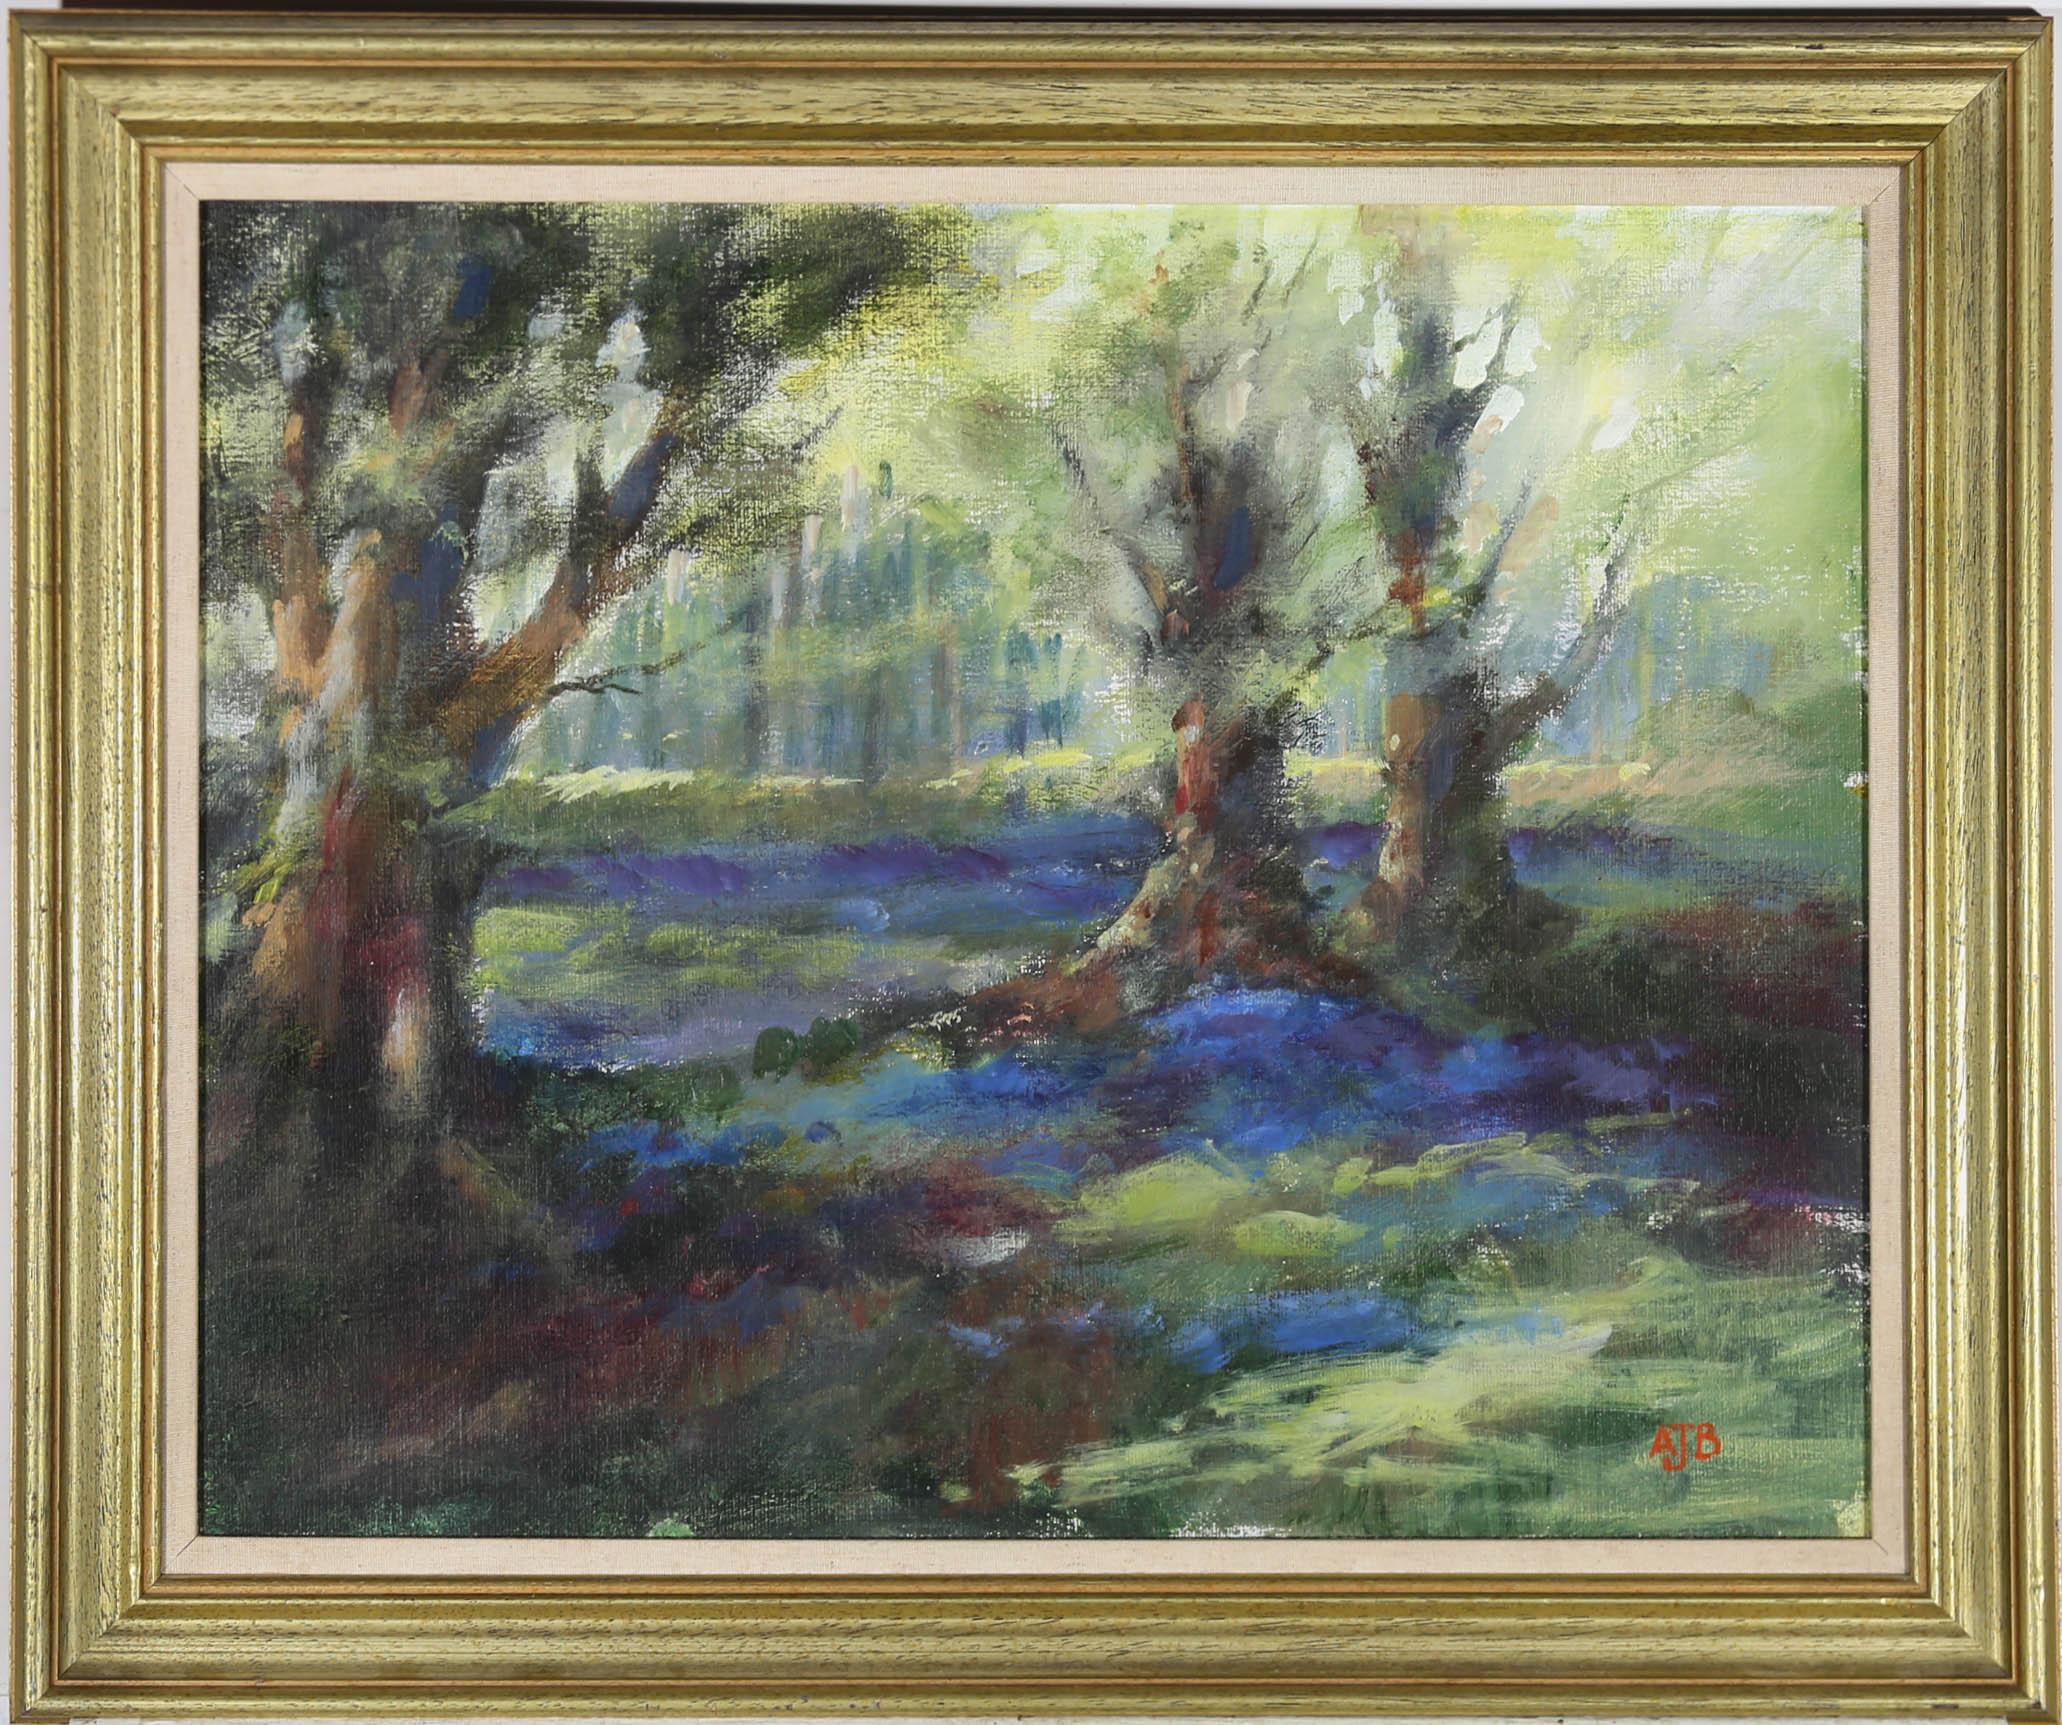 A colourful study of a spring woodland by 20th century artist Anthony Bloomfield. Signed with monogram to the lower right. Beautifully mounted in a cotton slip and metallic green frame. On canvas board.
